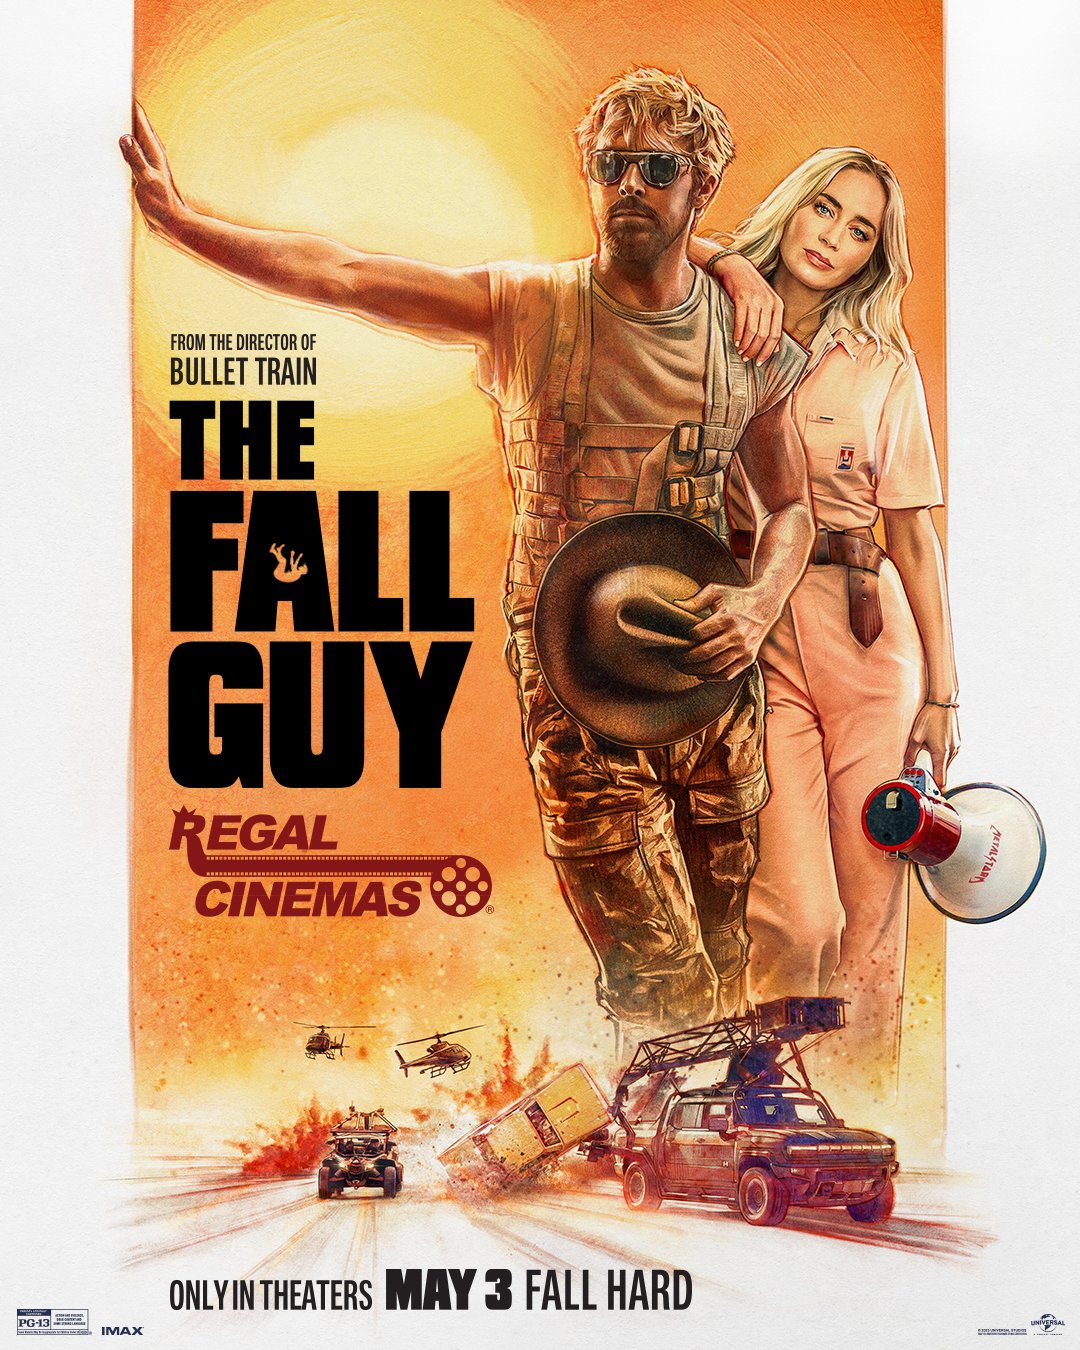 The Fall Guy Poster Previews Ryan Gosling-Led Action Comedy